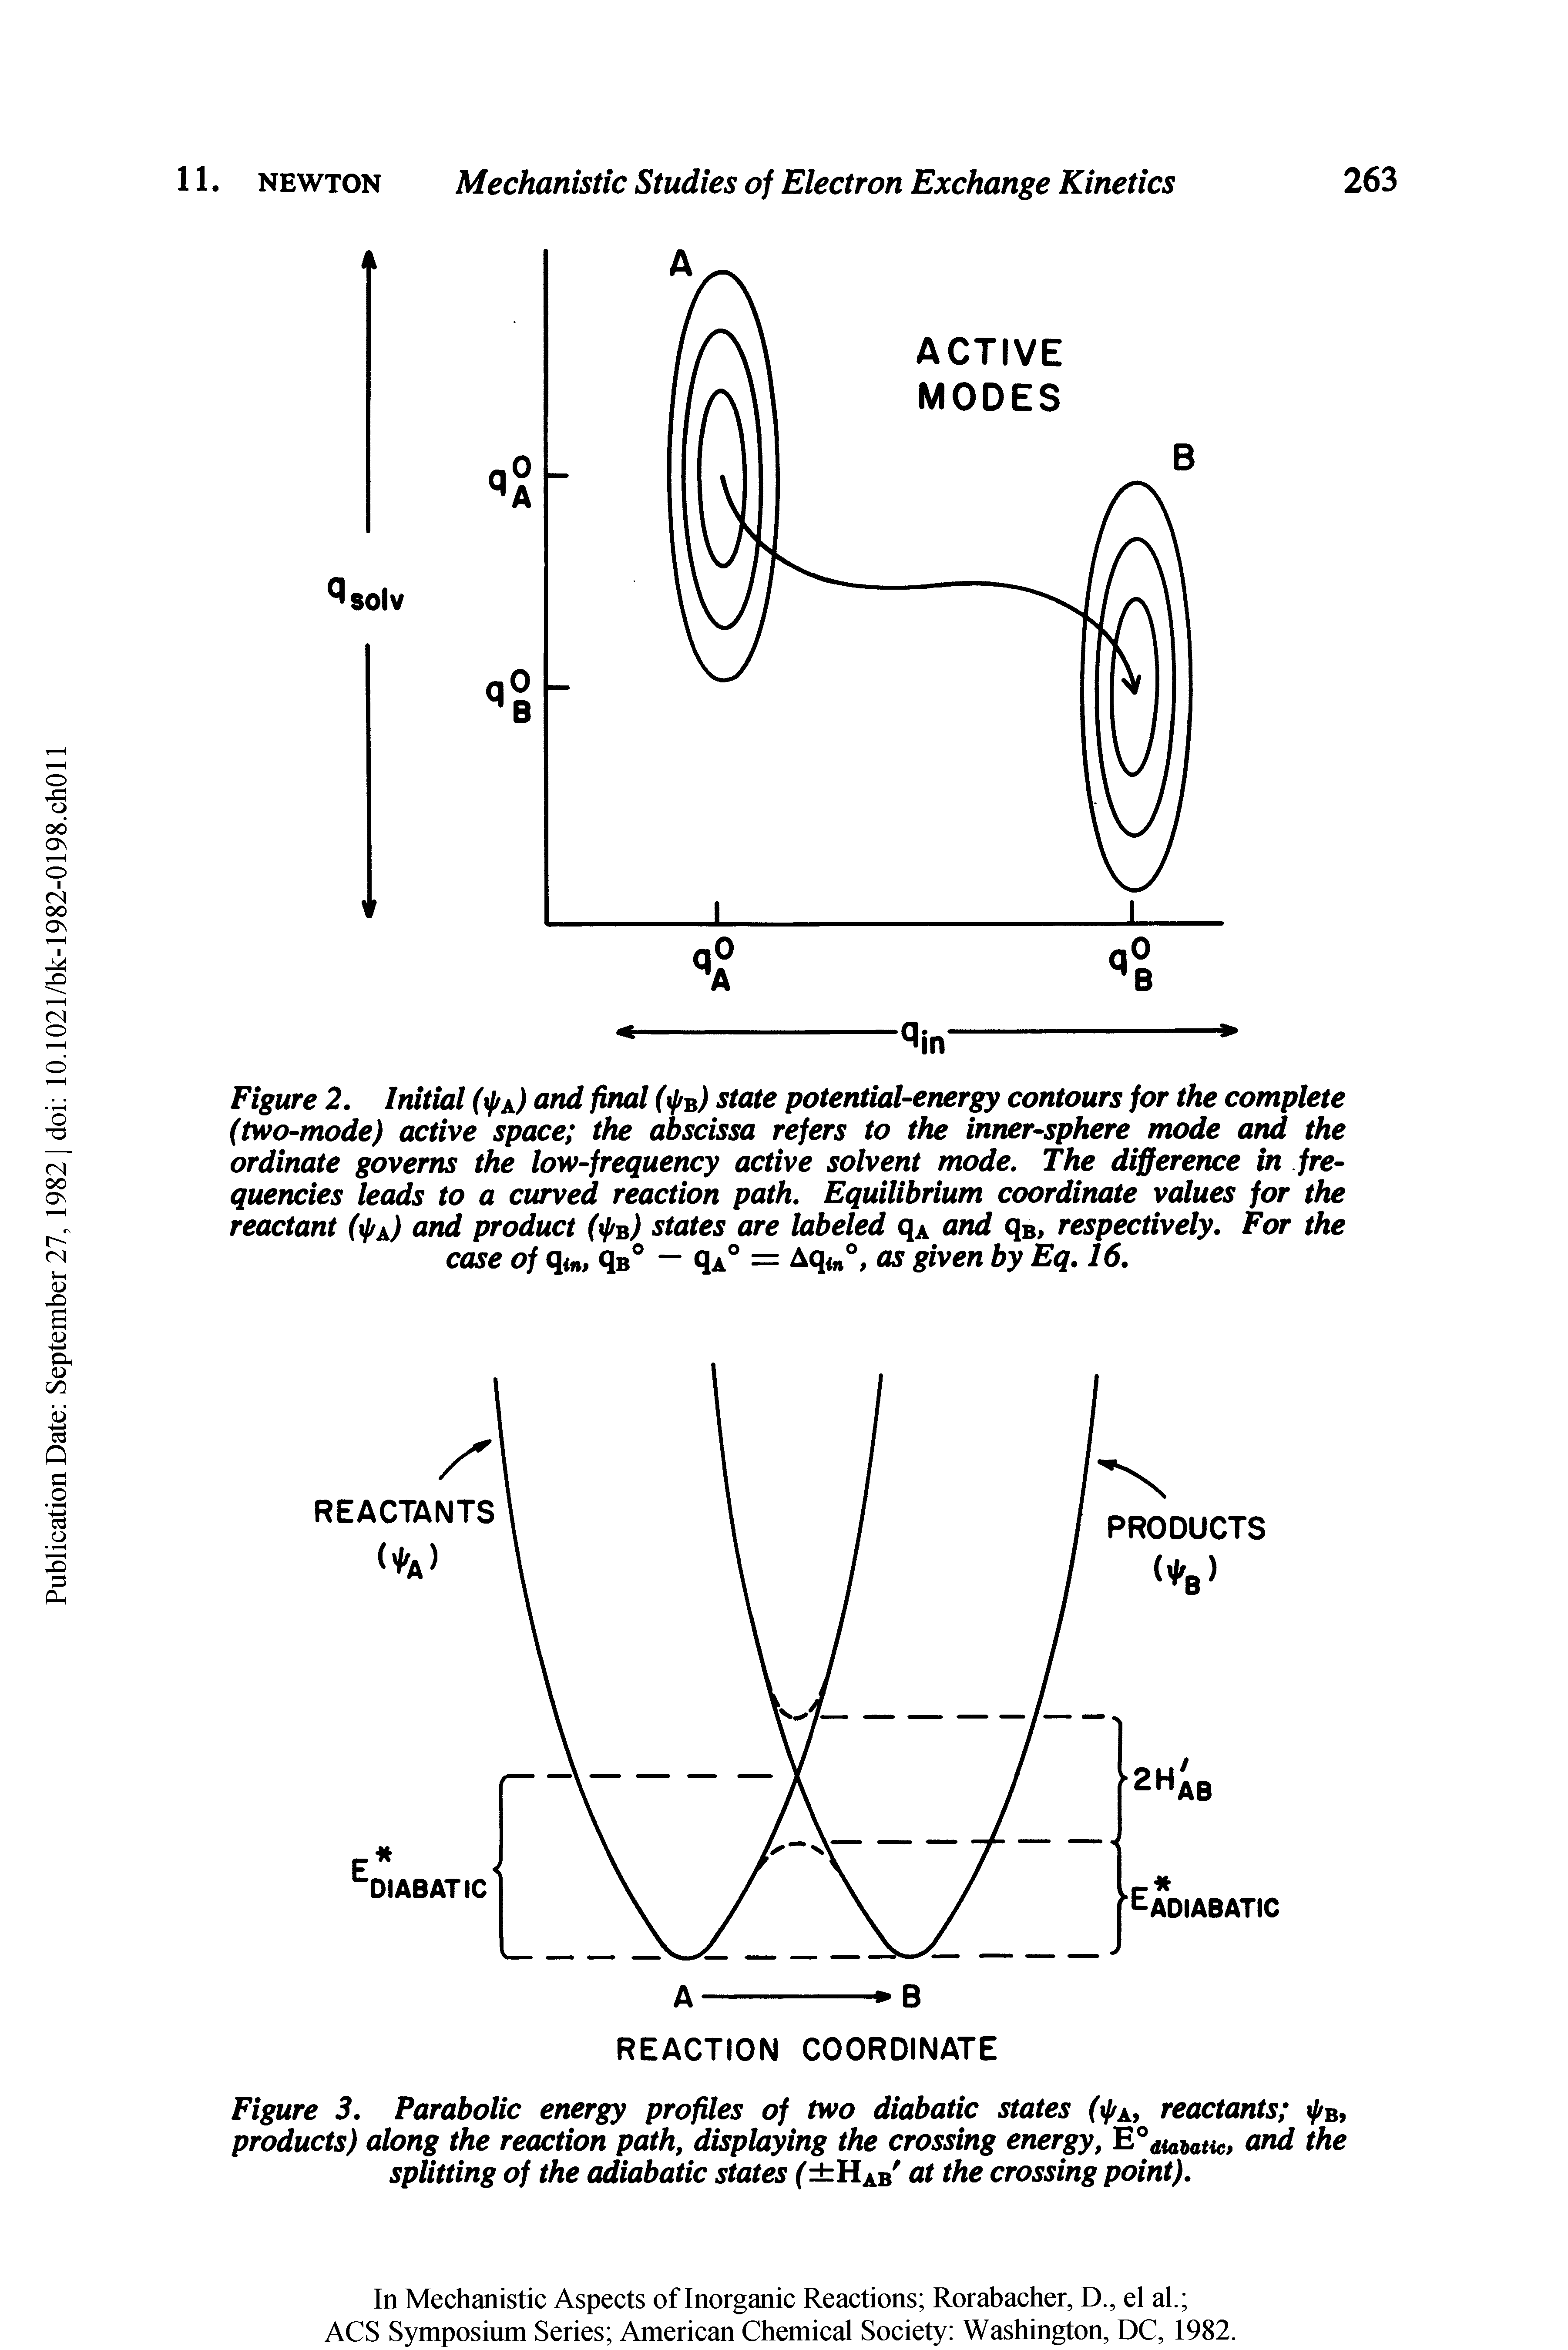 Figure 3. Parabolic energy profiles of two diabatic states ( (/A, reactants J/b, products) along the reaction path, displaying the crossing energy, E°aiahaUc, and the splitting of the adiabatic states ( HAb at the crossing point).